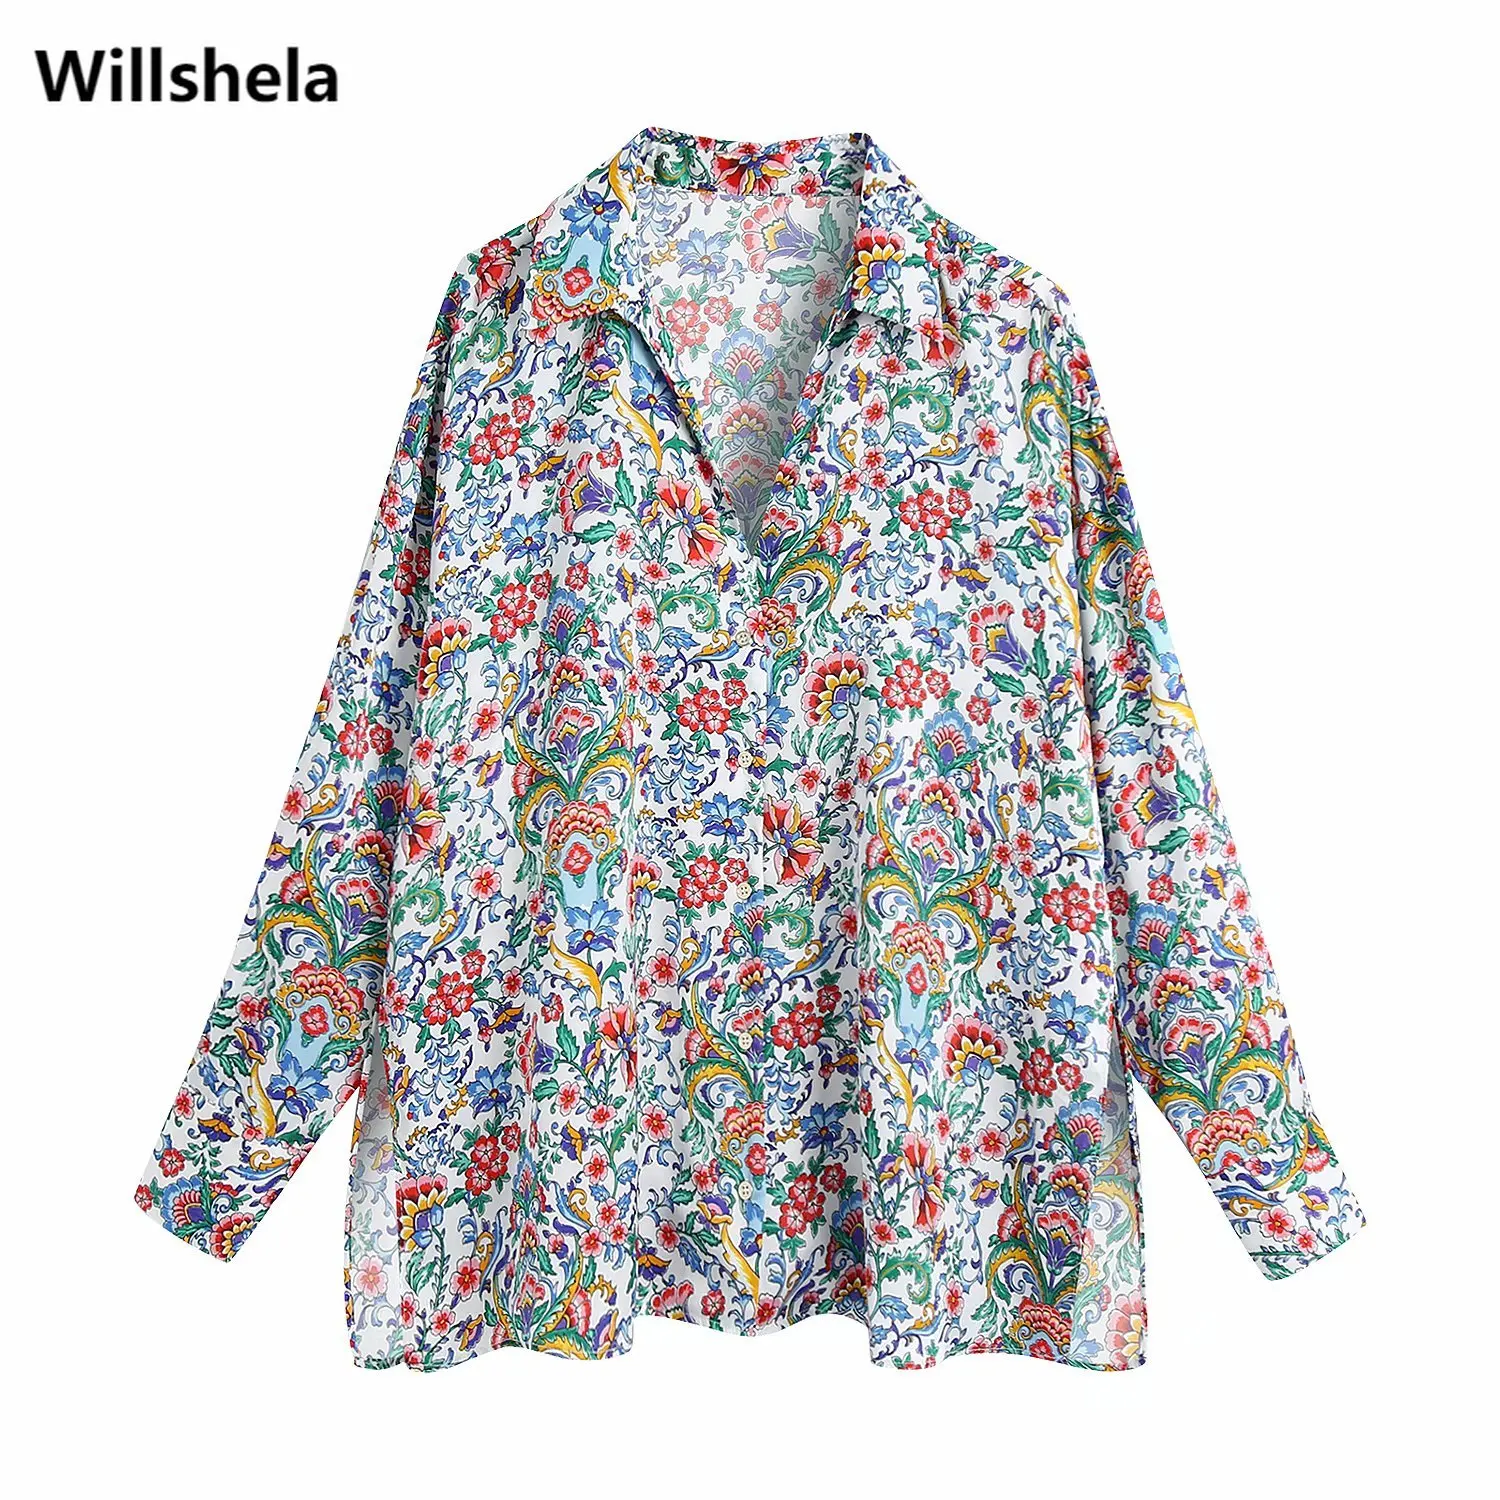 

2021 Vintage Women Floral Shirt Fashion Long Sleeves Blouse Casual Buttoned Top Chic Lady Tops Woman haut femme